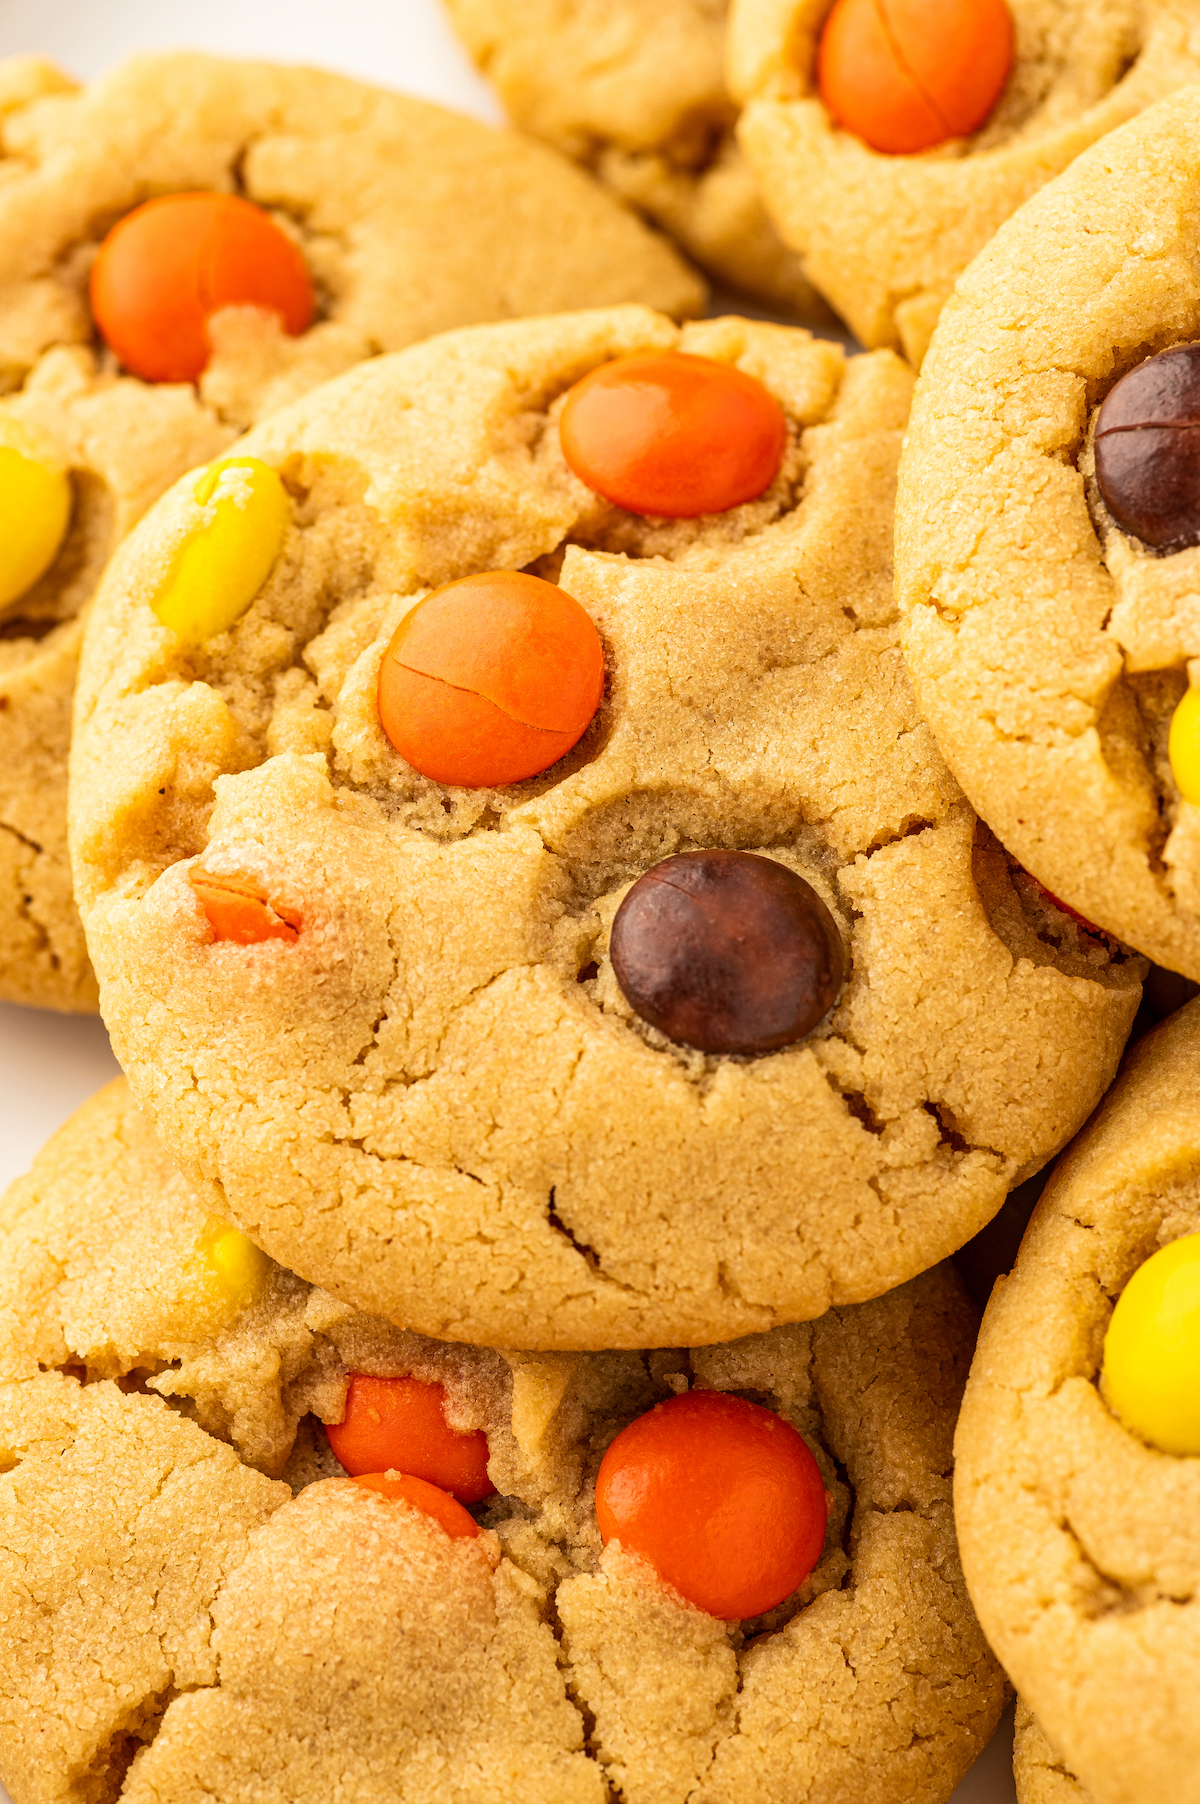 Close-up shot of cookies studded with candies, showing the texture of the baked cookie dough.